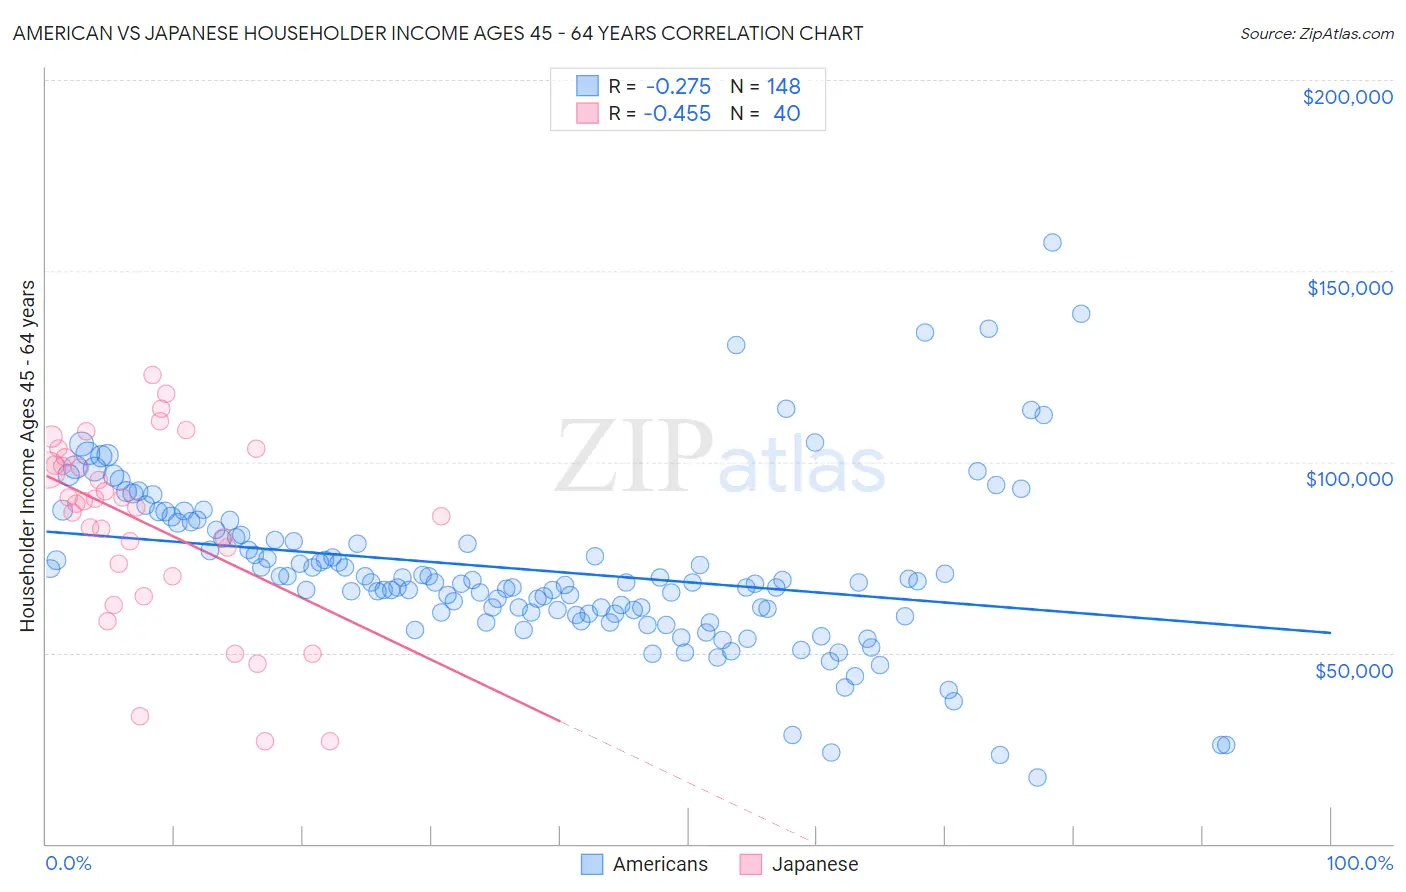 American vs Japanese Householder Income Ages 45 - 64 years